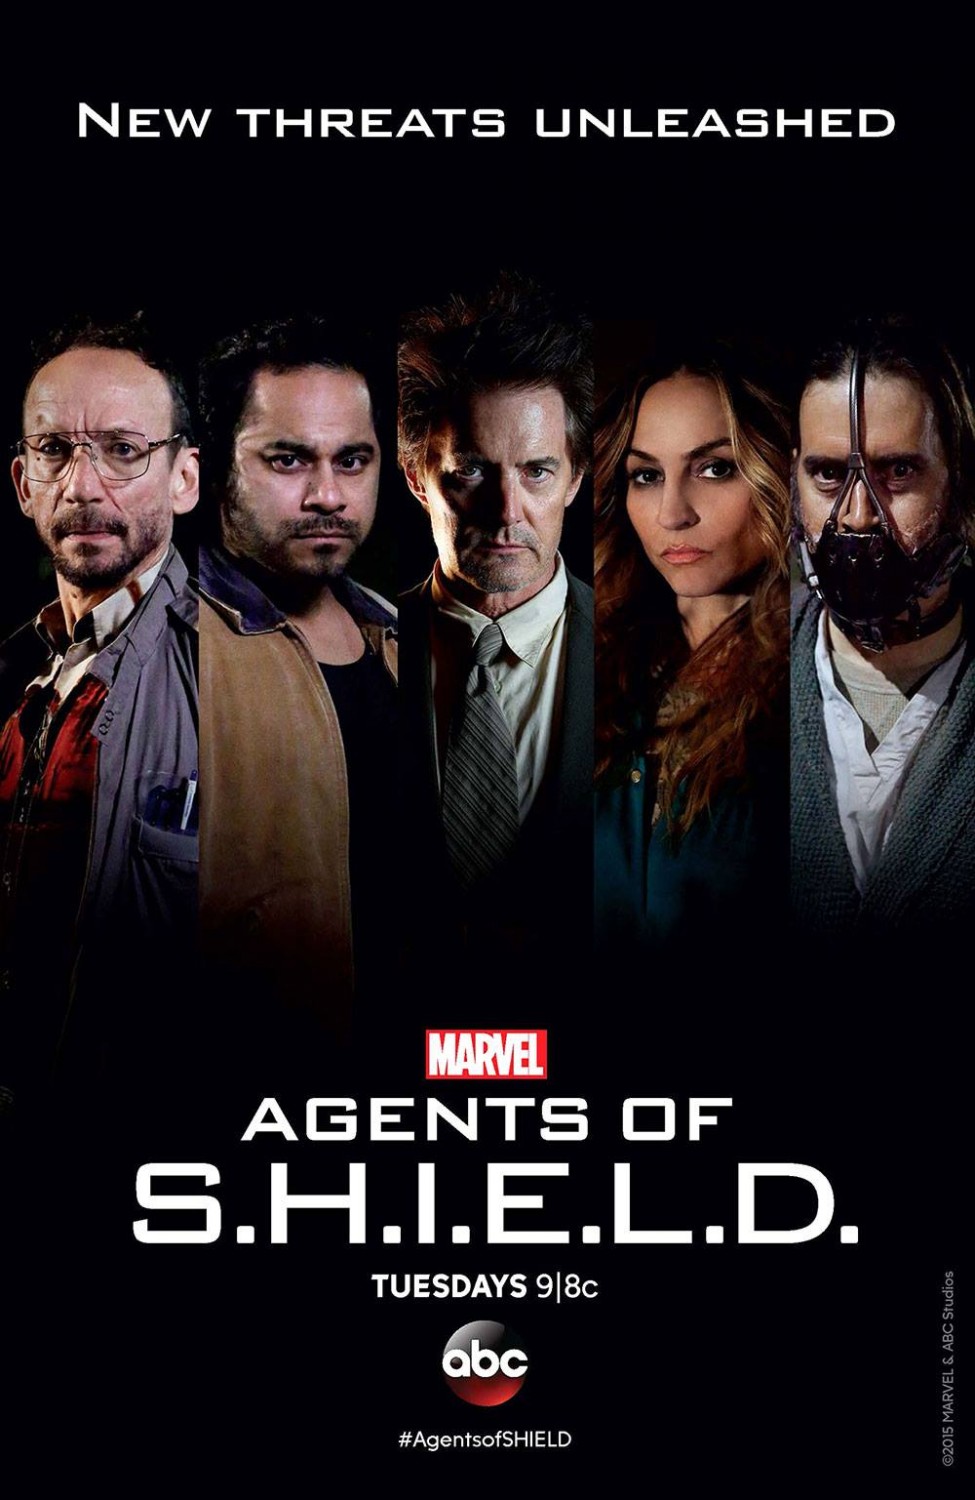 Extra Large TV Poster Image for Agents of S.H.I.E.L.D. (#10 of 27)